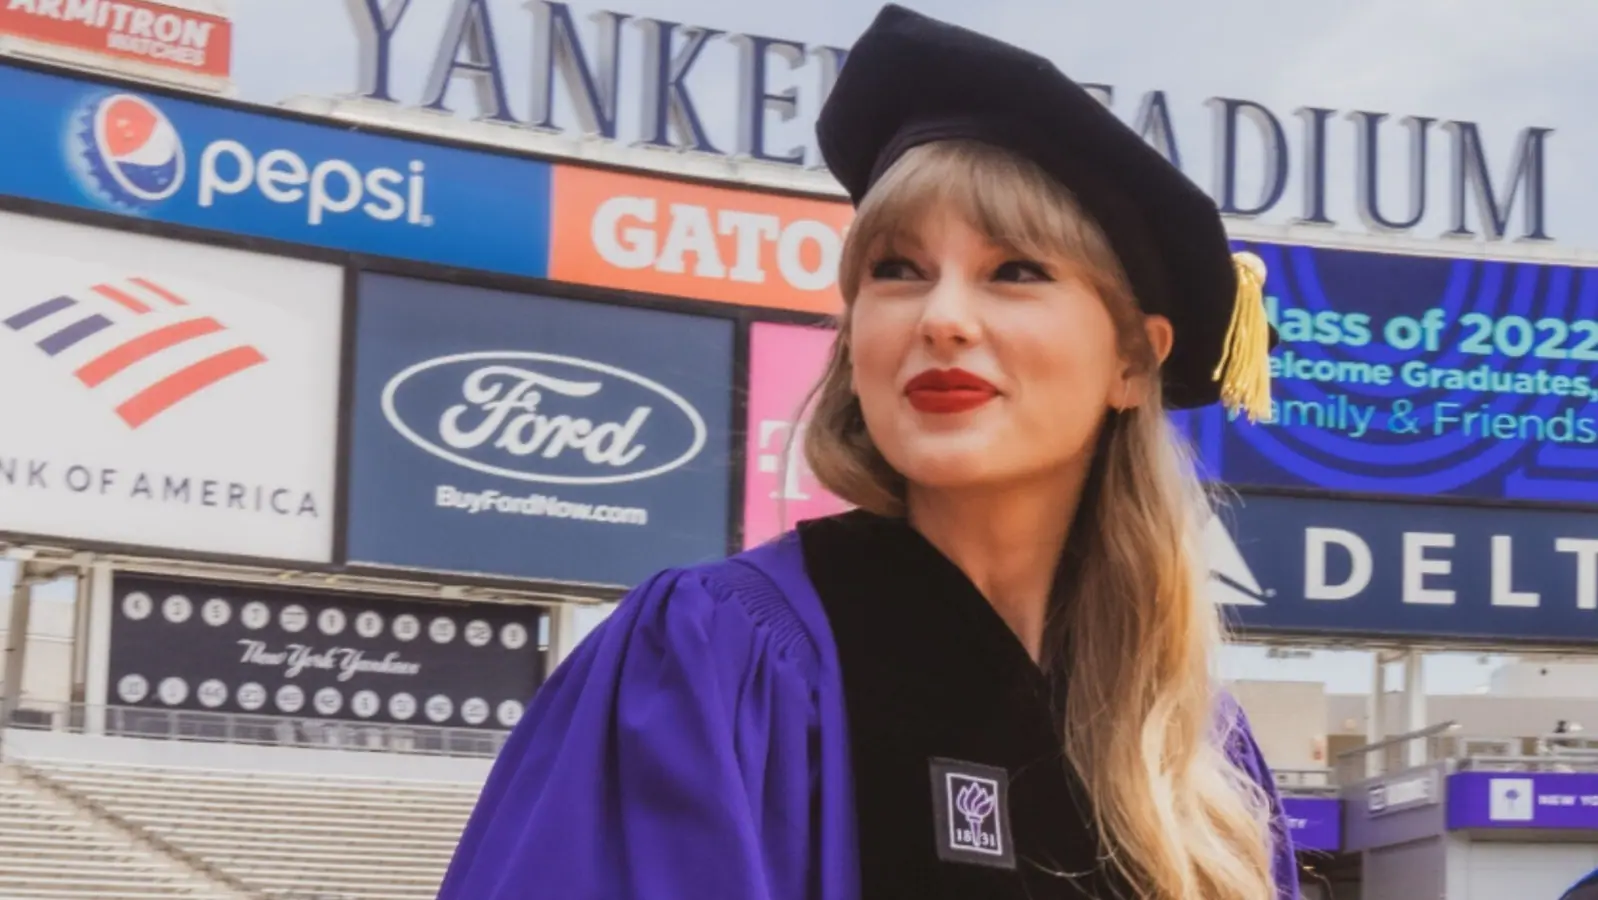 Dr Taylor Swift will see you now: Singer receives honorary doctorate from New York University